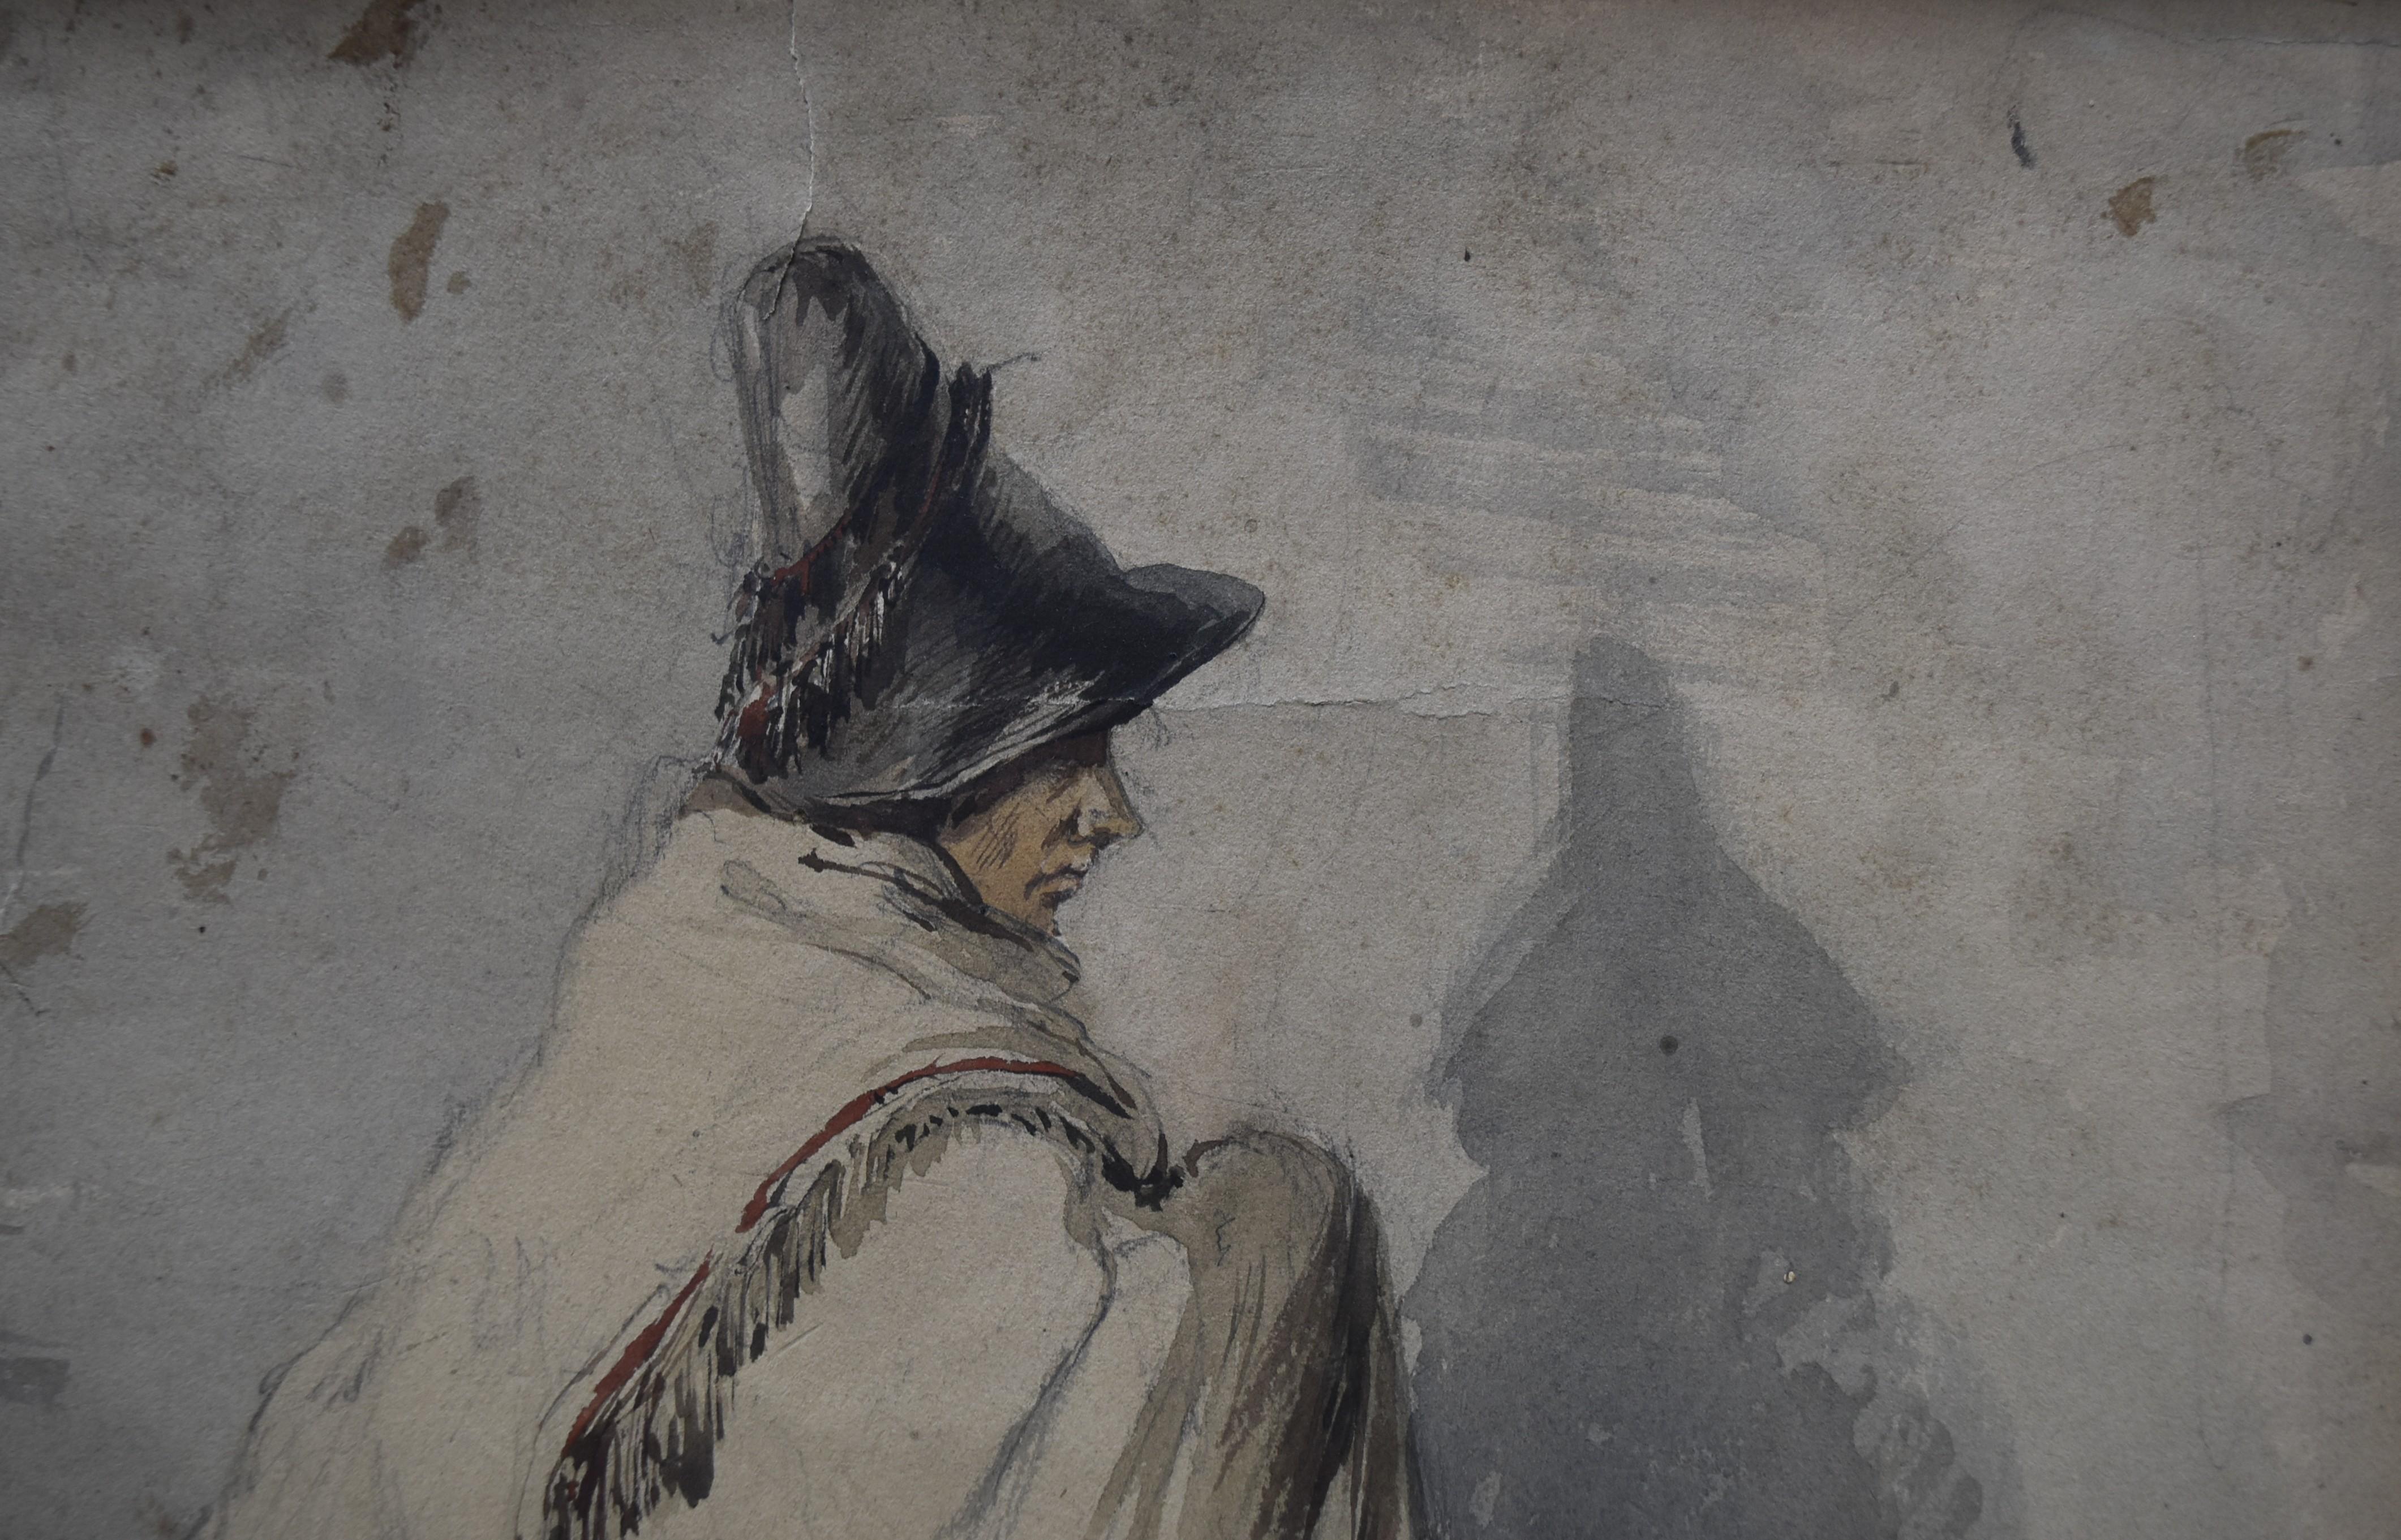 Paul Gavarni (1804-1866)
A Vagabond Traveler
Watercolor on paper
32.5 x 23 cm
annotated on the back 